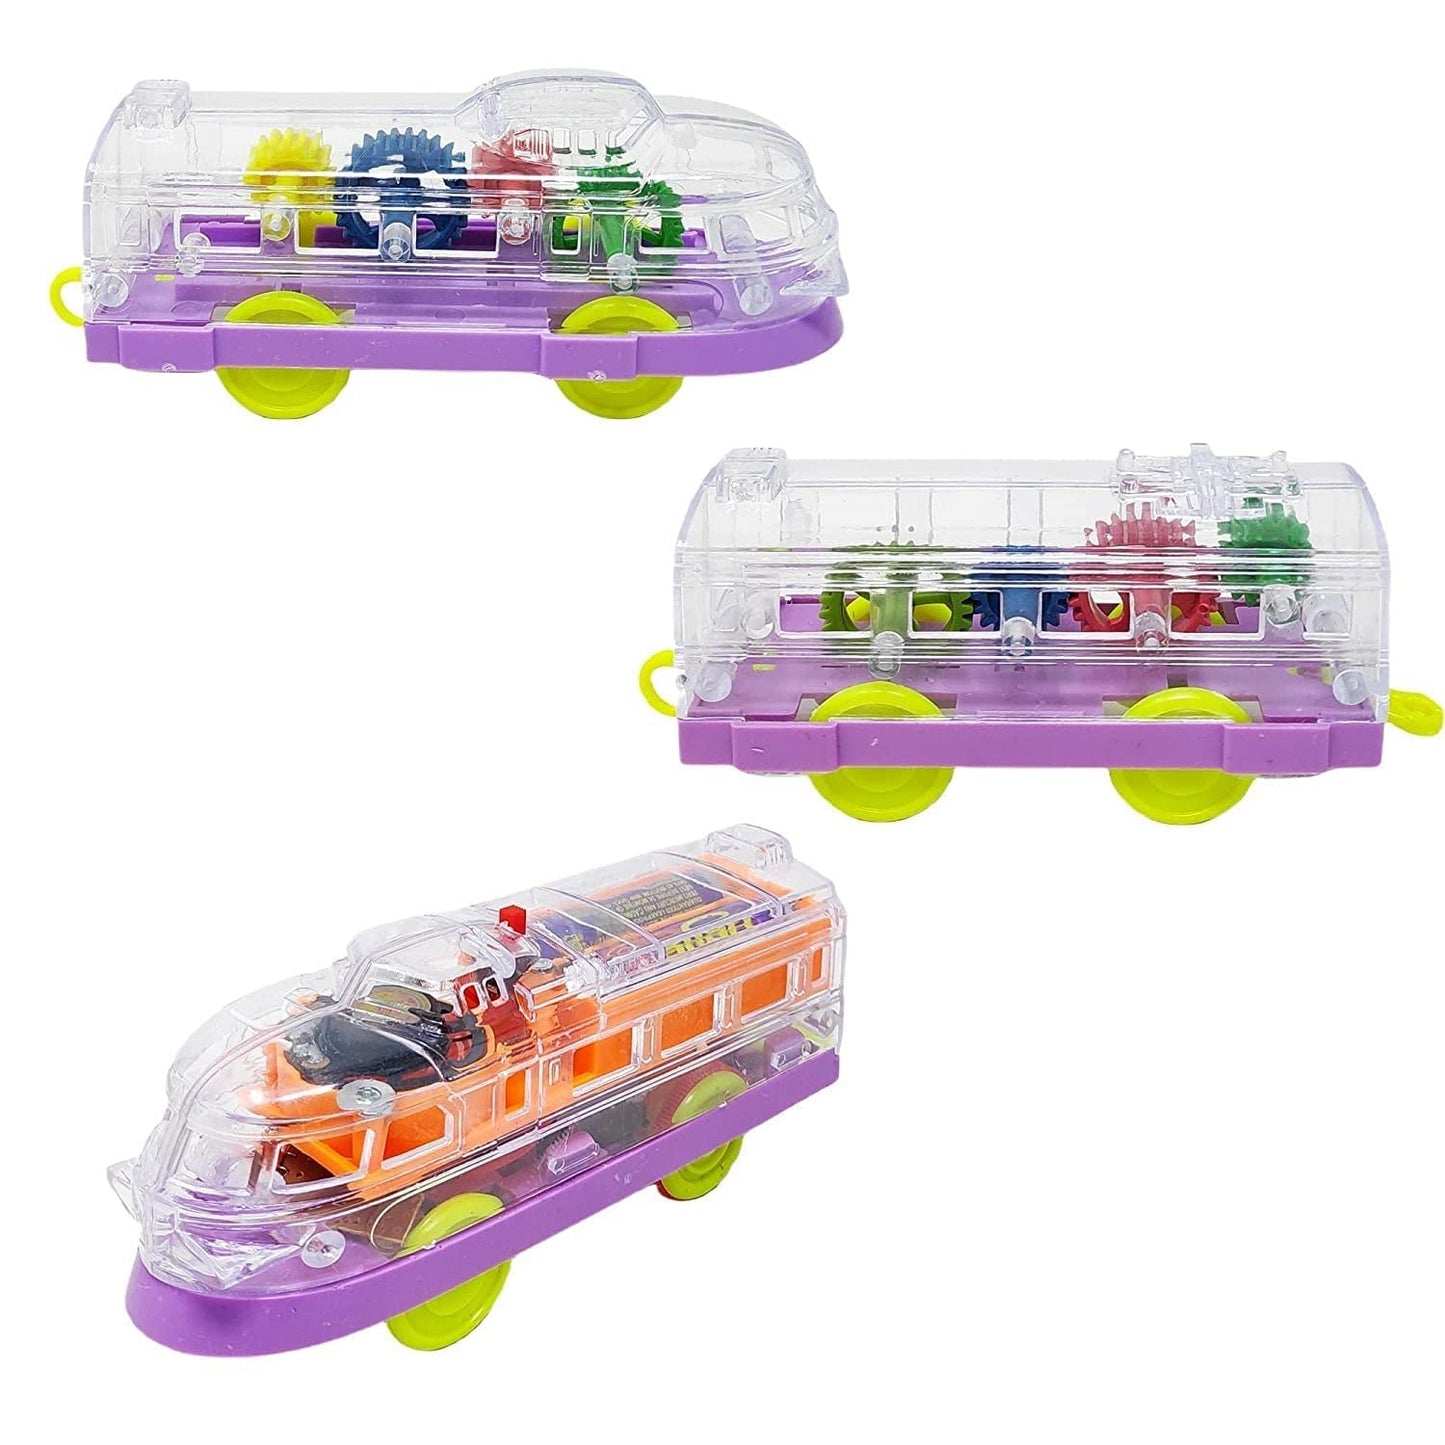 Train Set, Train With Long Track For Kids With Rotating Gears Transparent Plastic Body